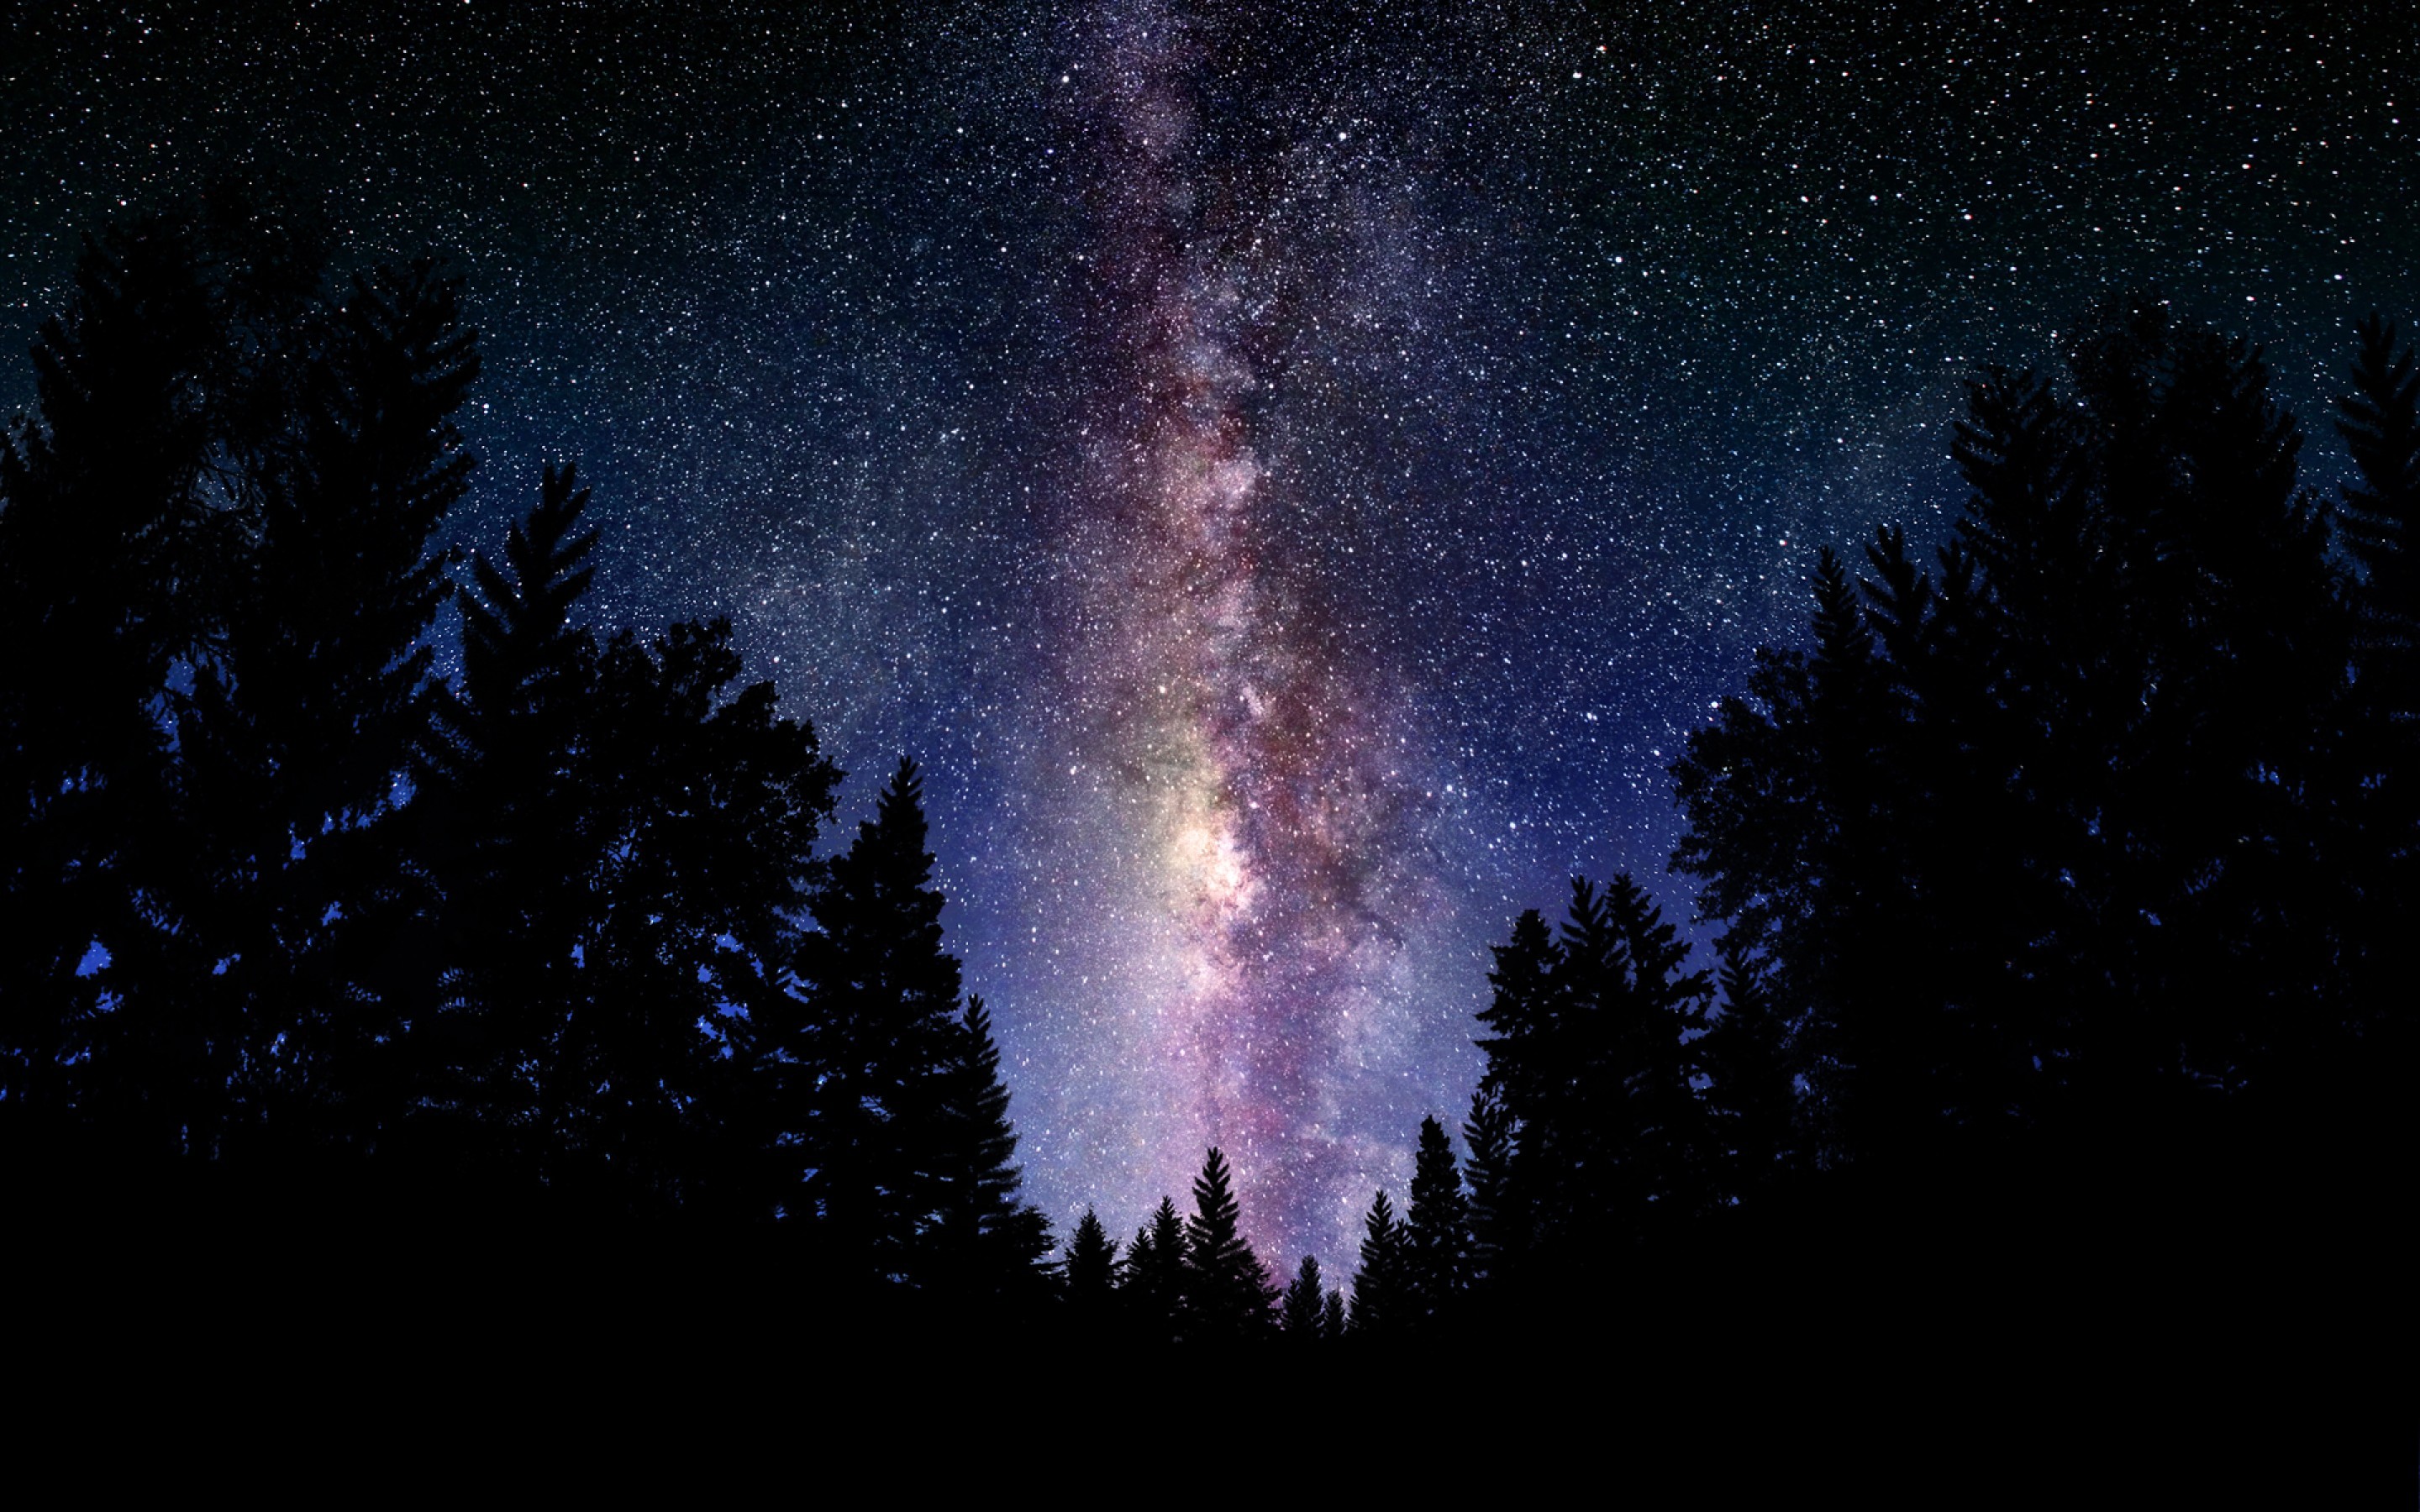 Galaxy wallpaper hd free download for android